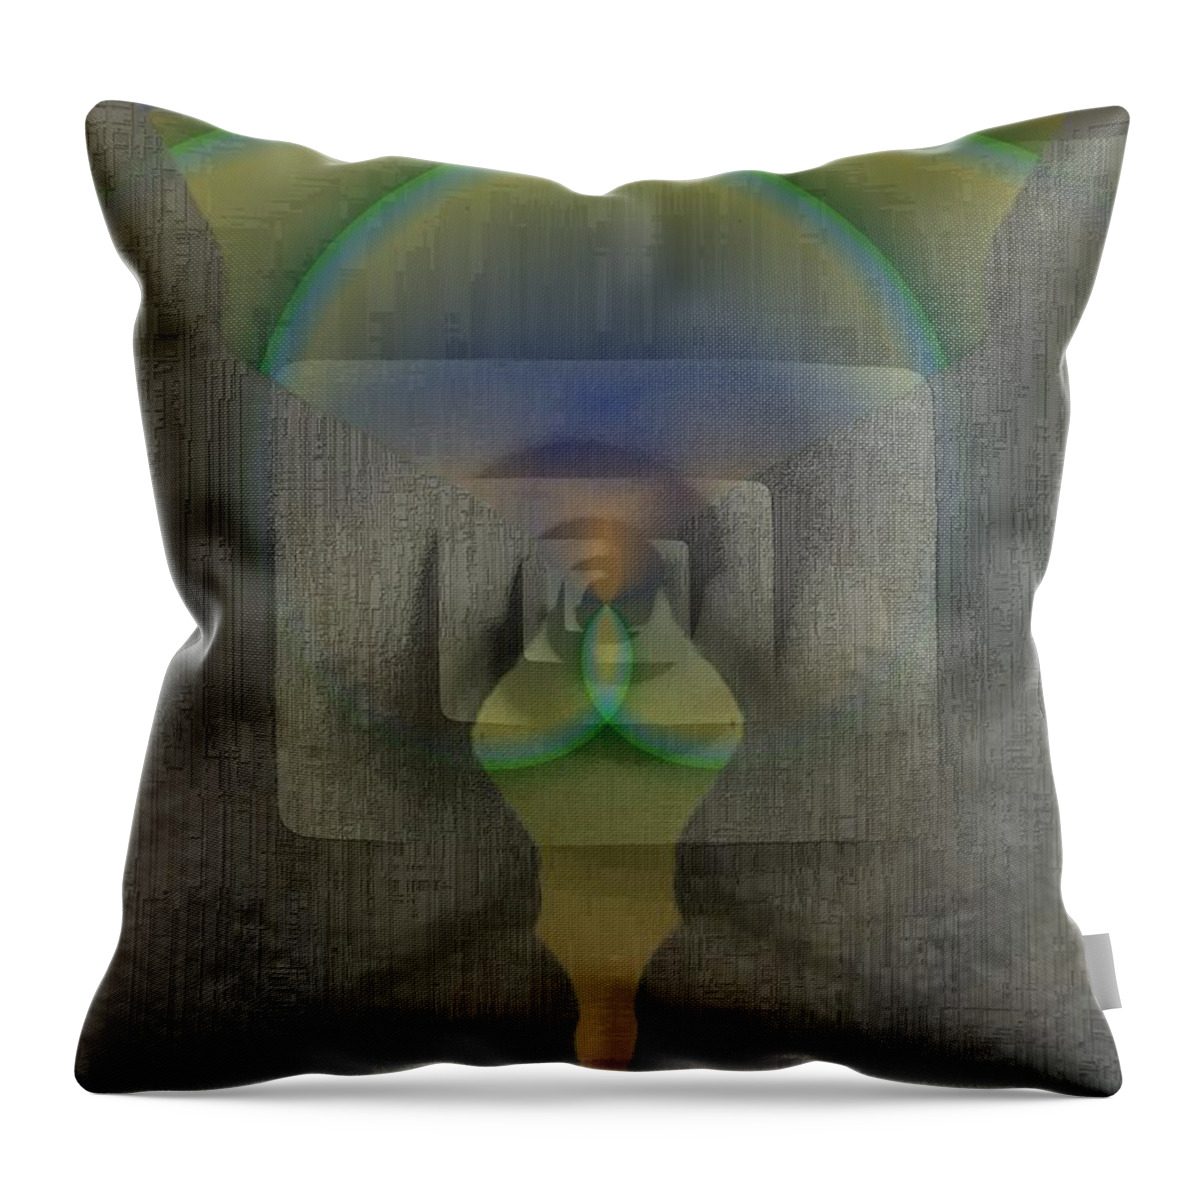 Reflection Throw Pillow featuring the digital art Reflections Of The Soul by Tim Allen